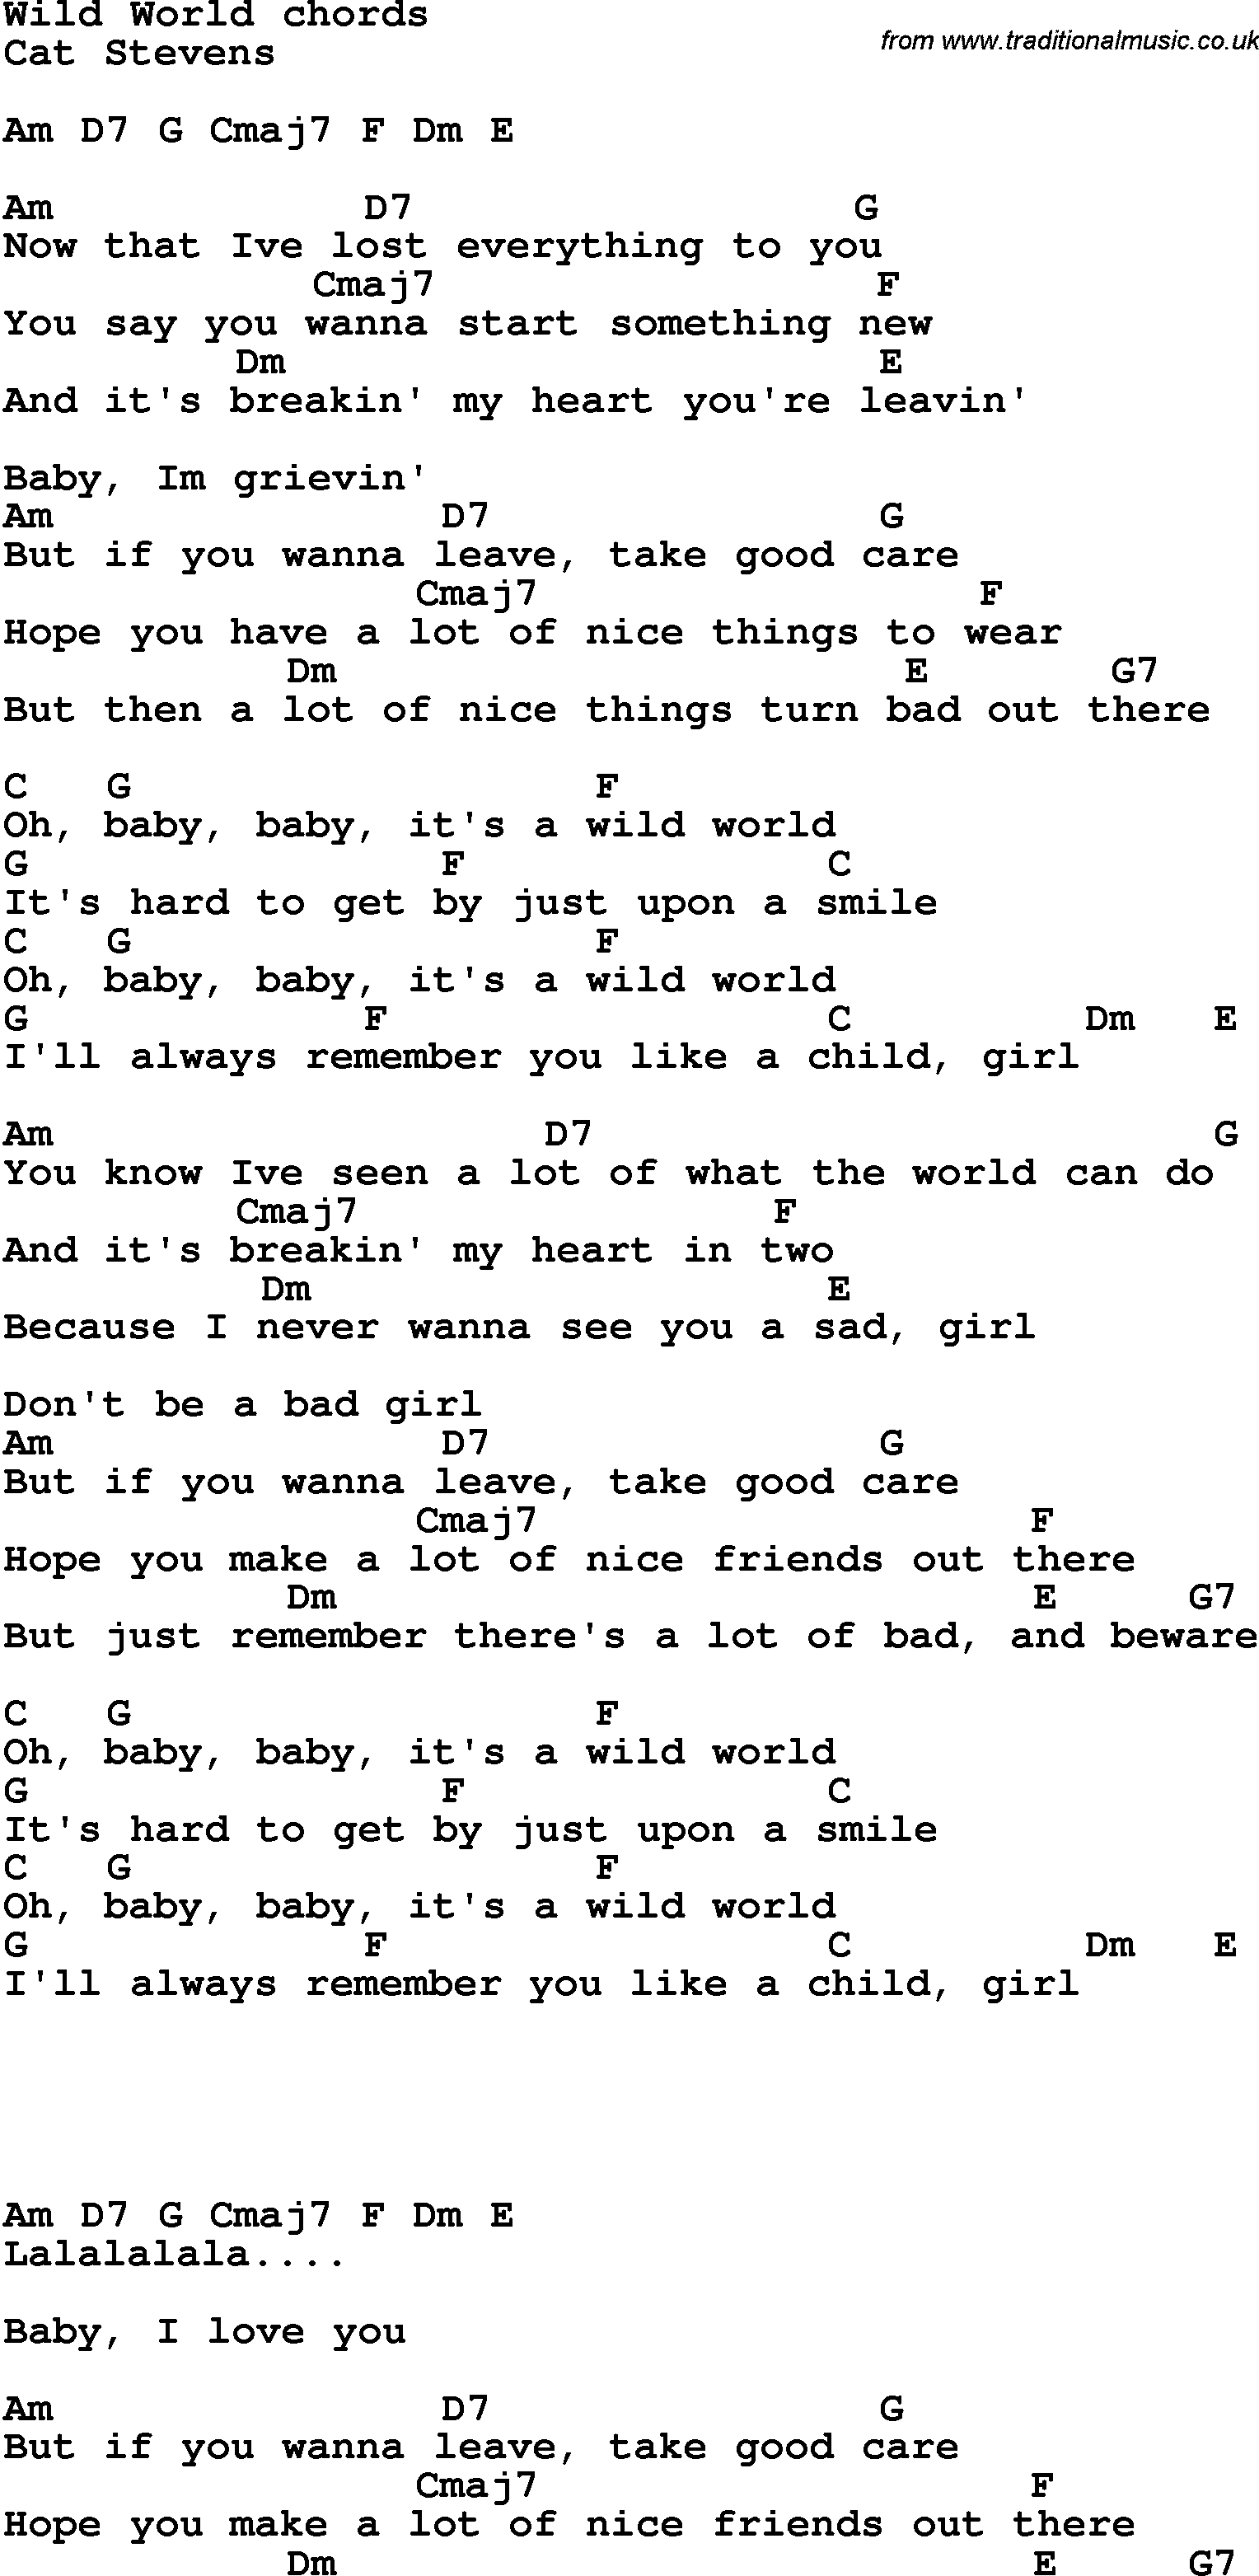 Song Lyrics with guitar chords for Wild World